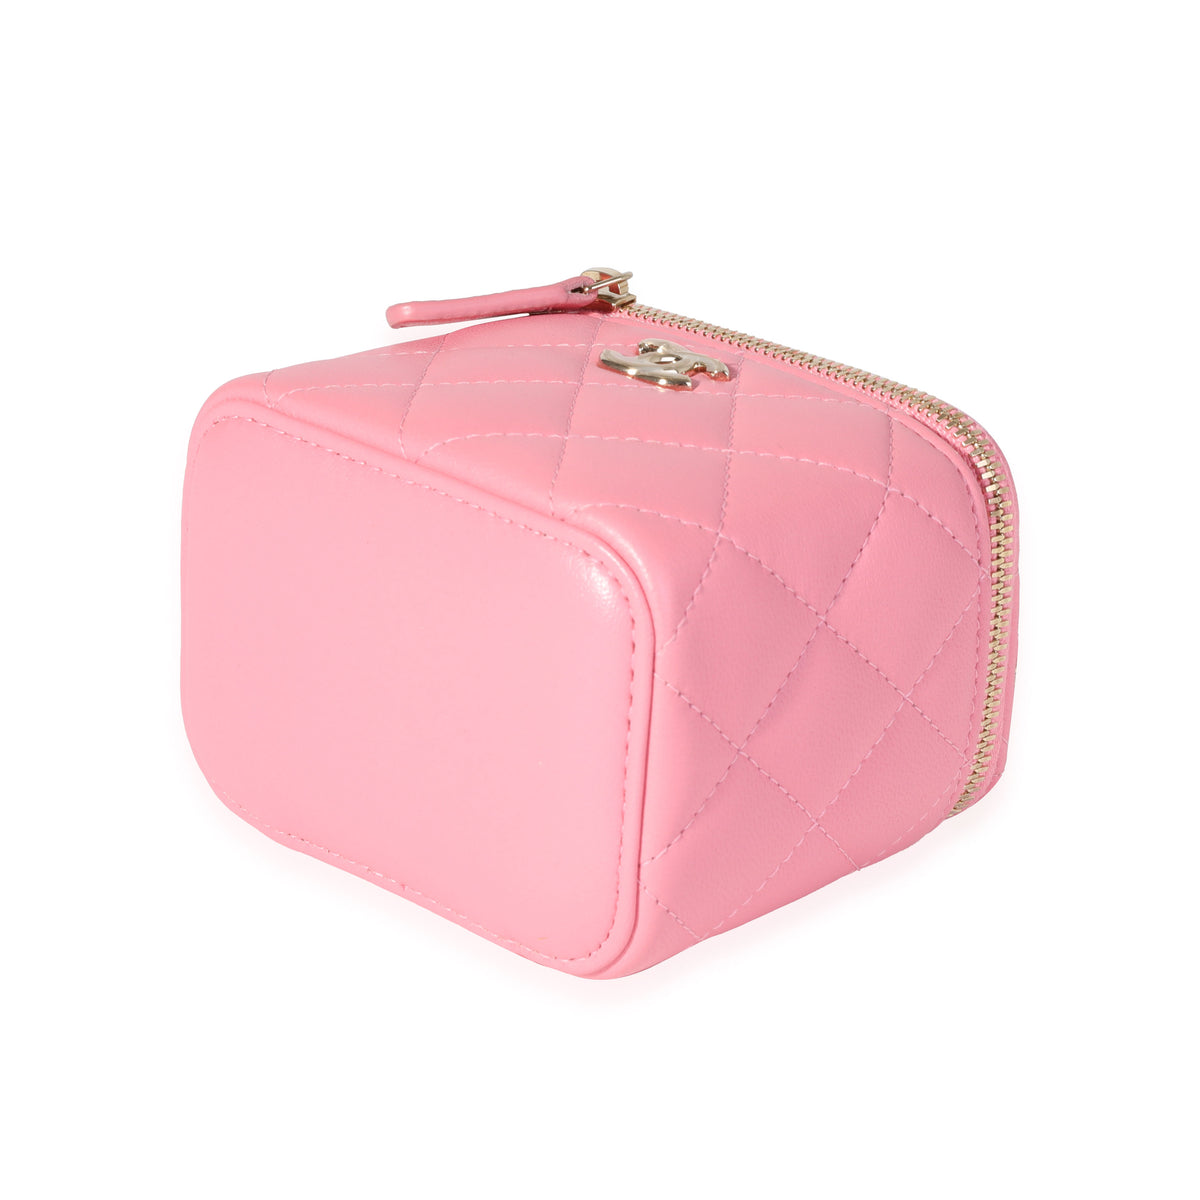 Chanel Light Pink Quilted Lambskin Mini Vanity with Chain